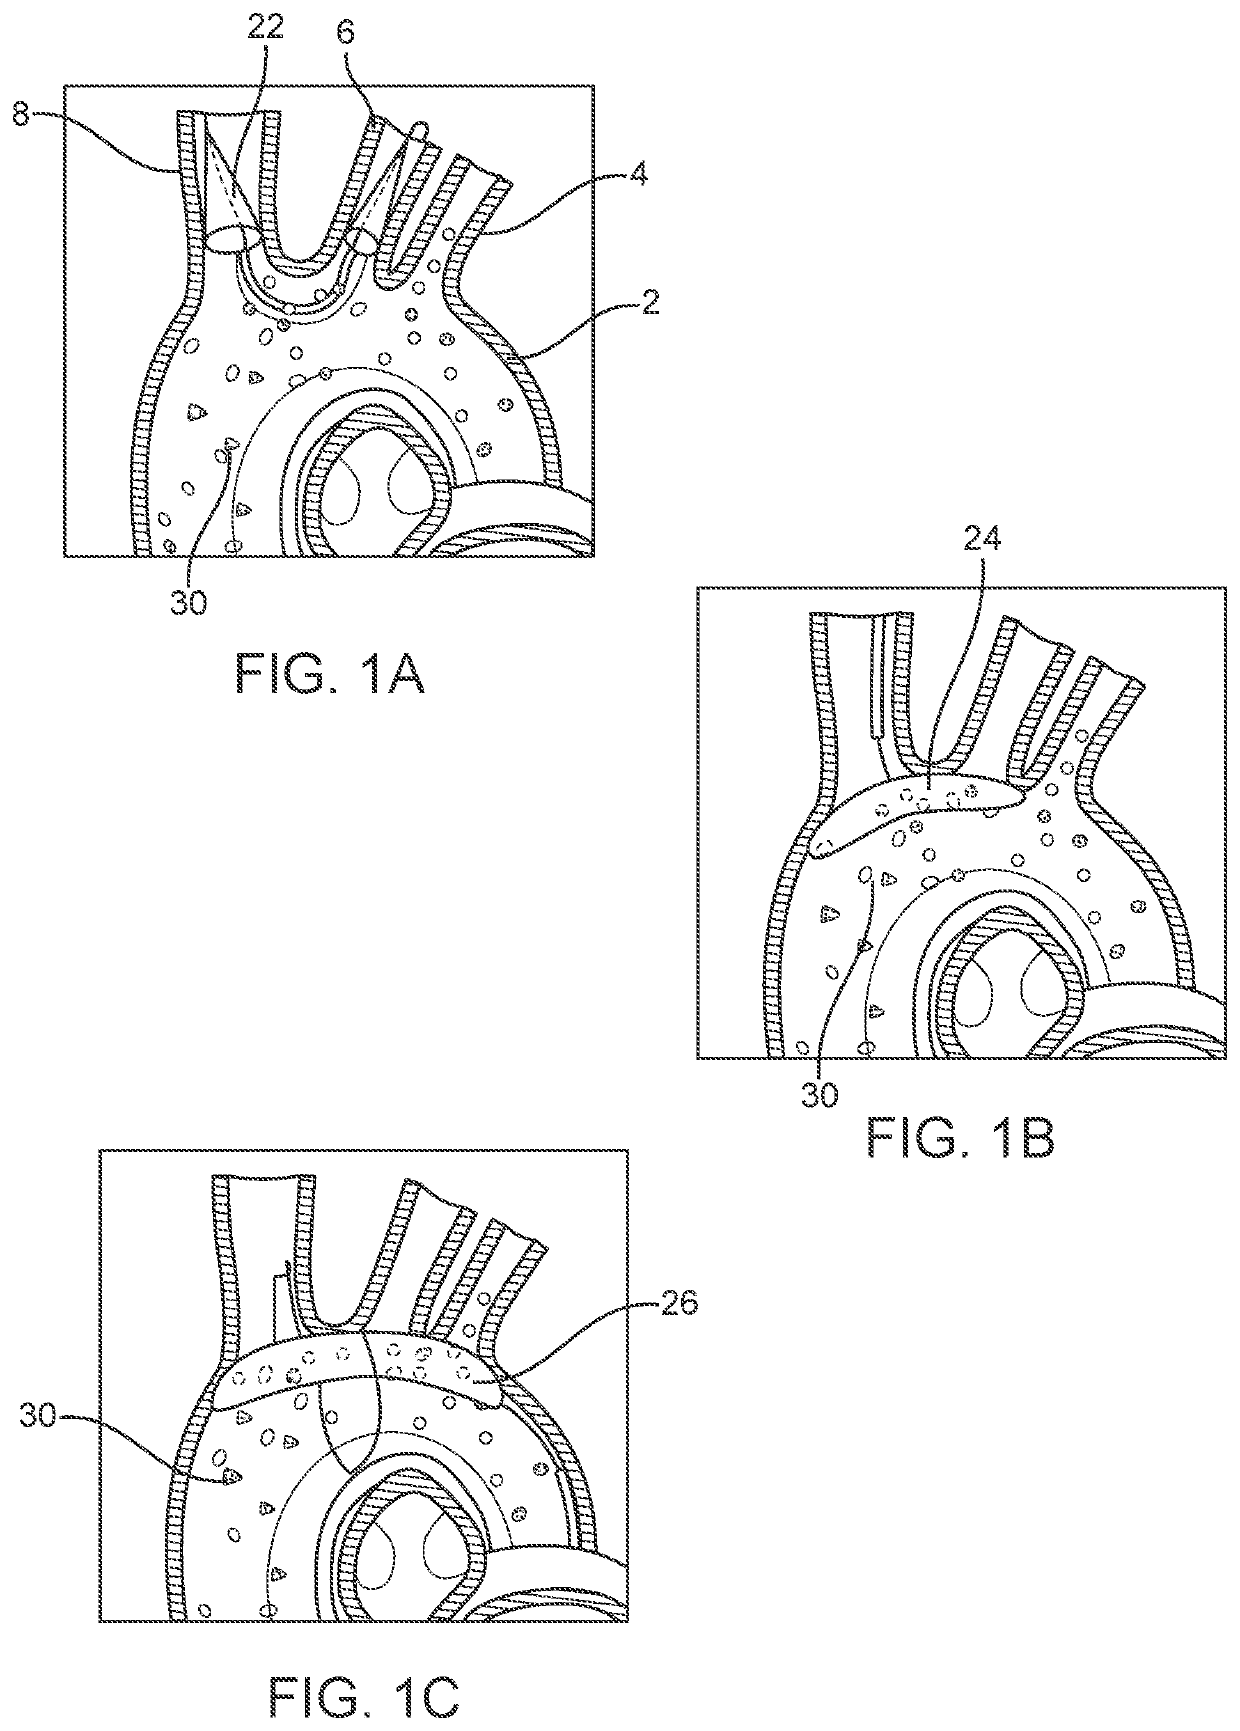 Accessory device to provide neuroprotection during interventional procedures